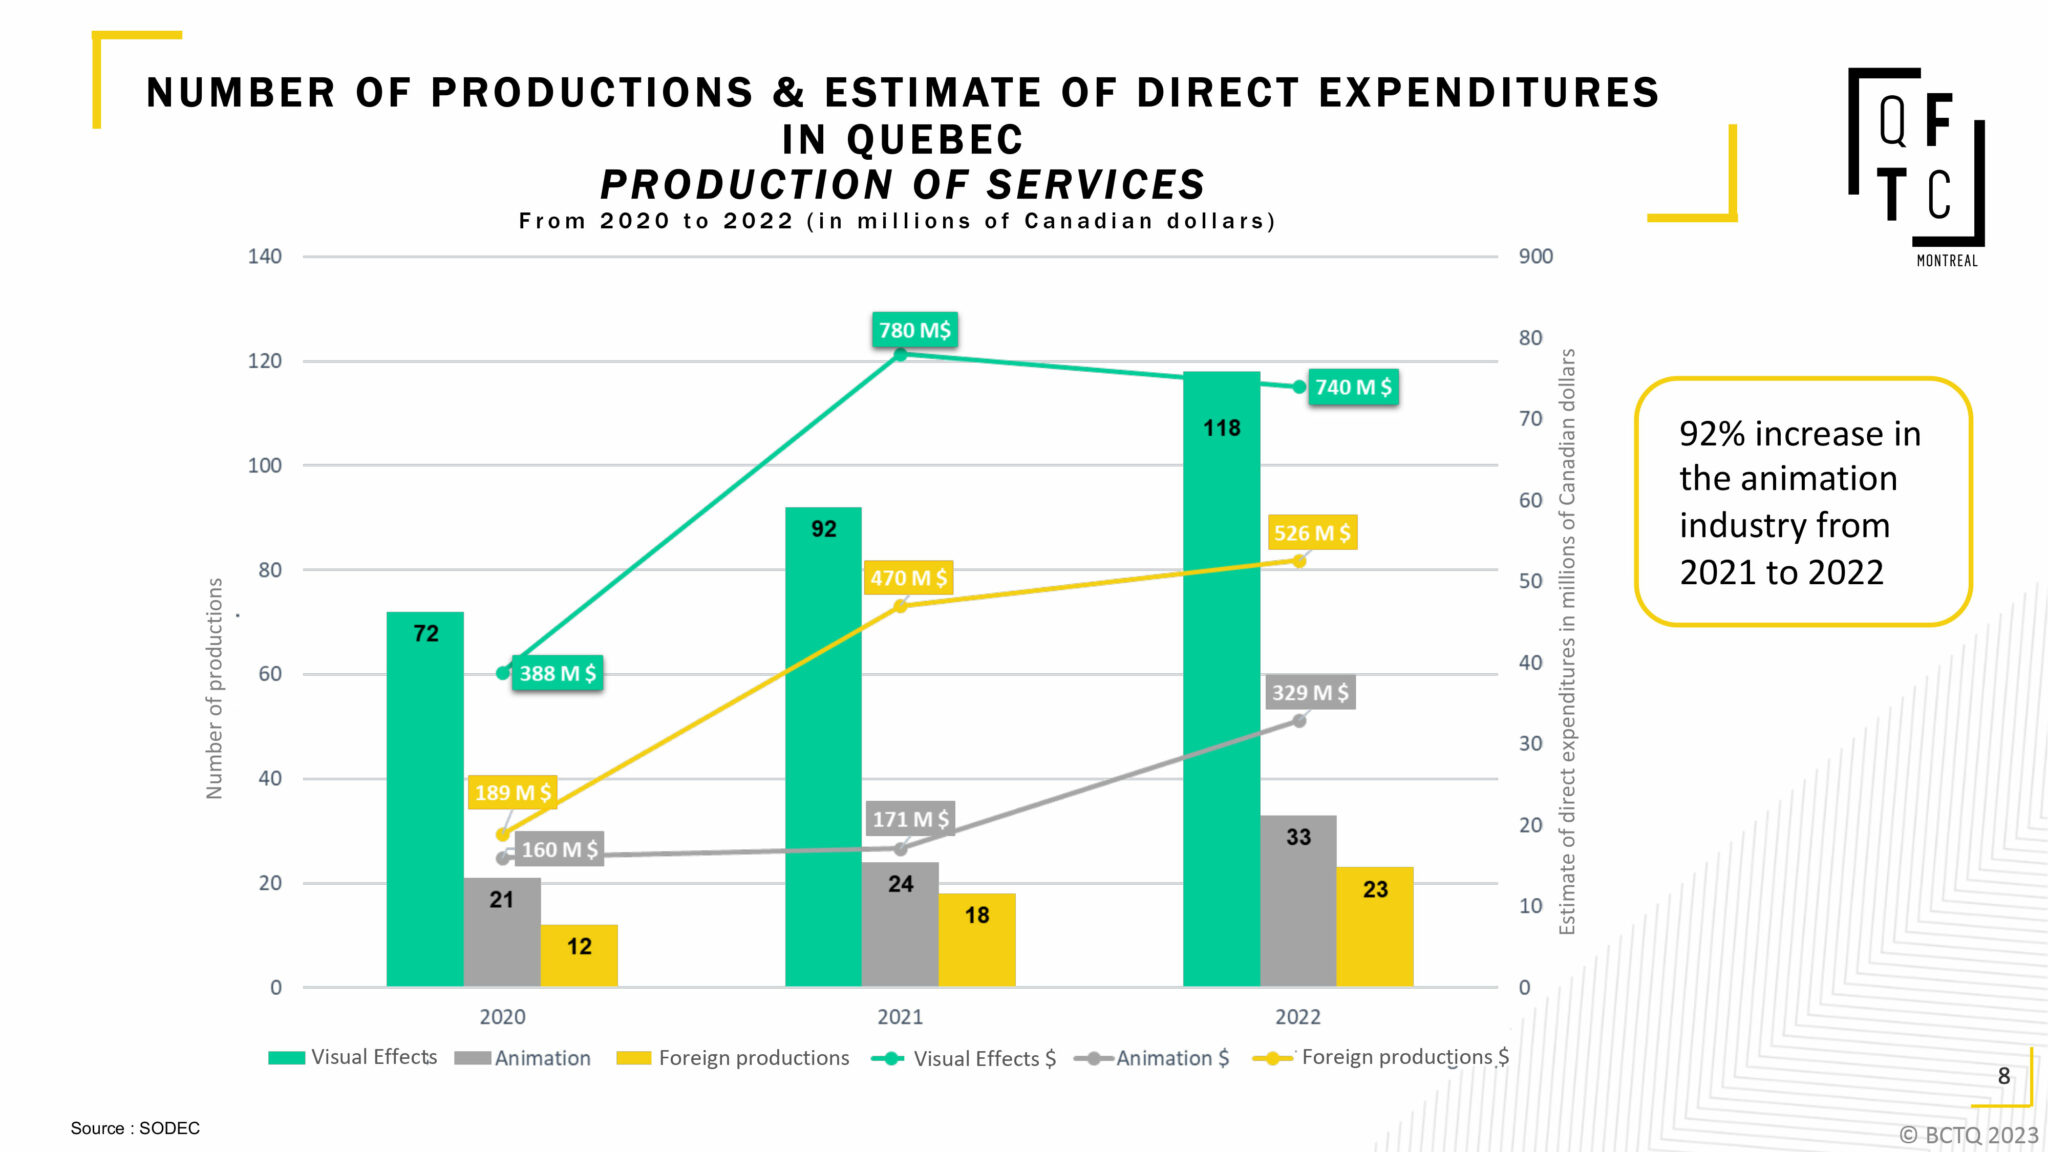 Productions and direct expenditures for the year 2022